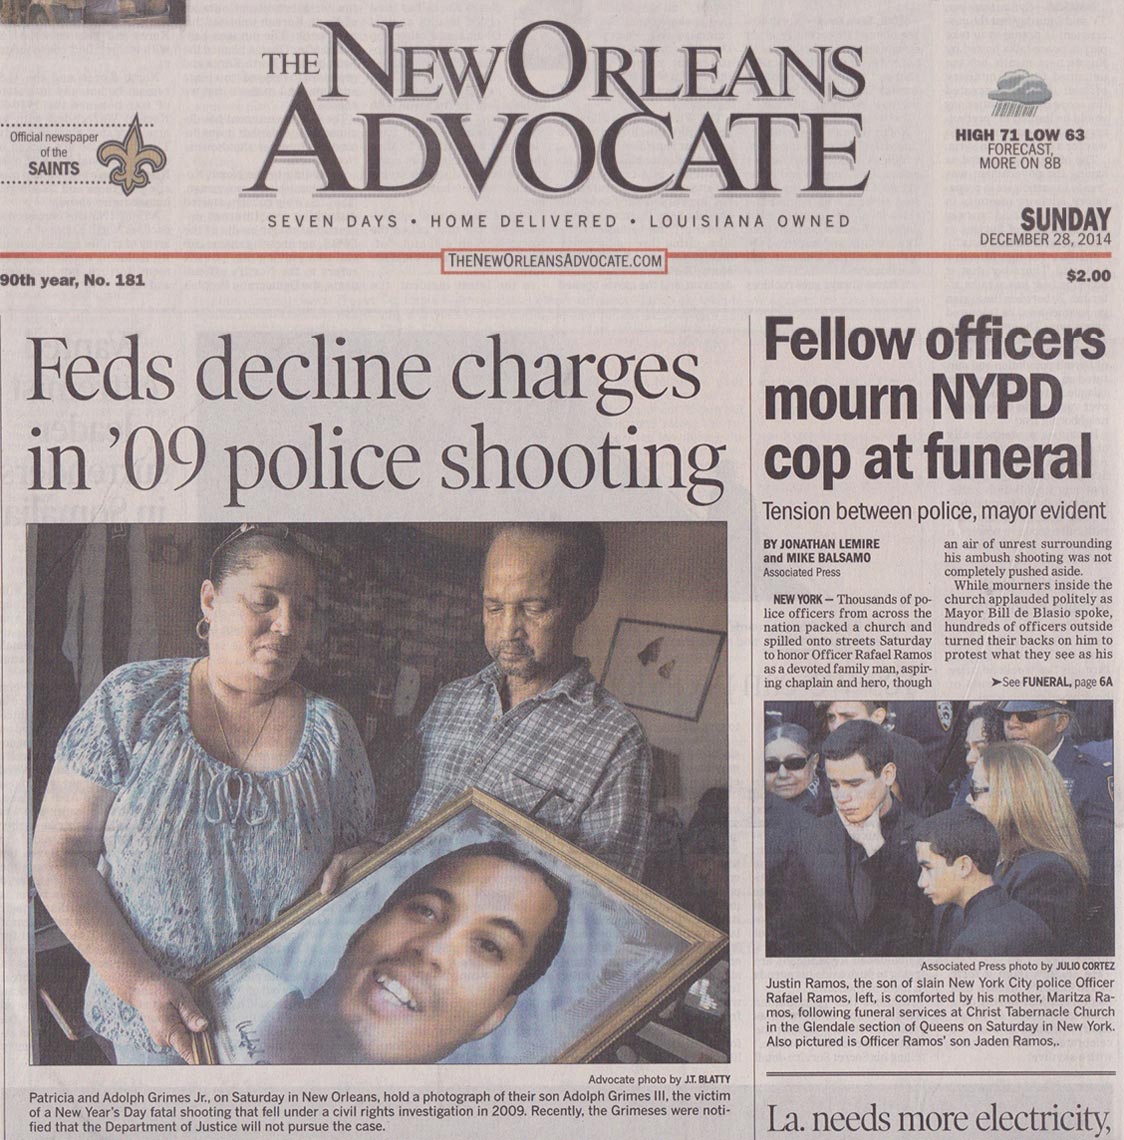 New Orleans Advocate